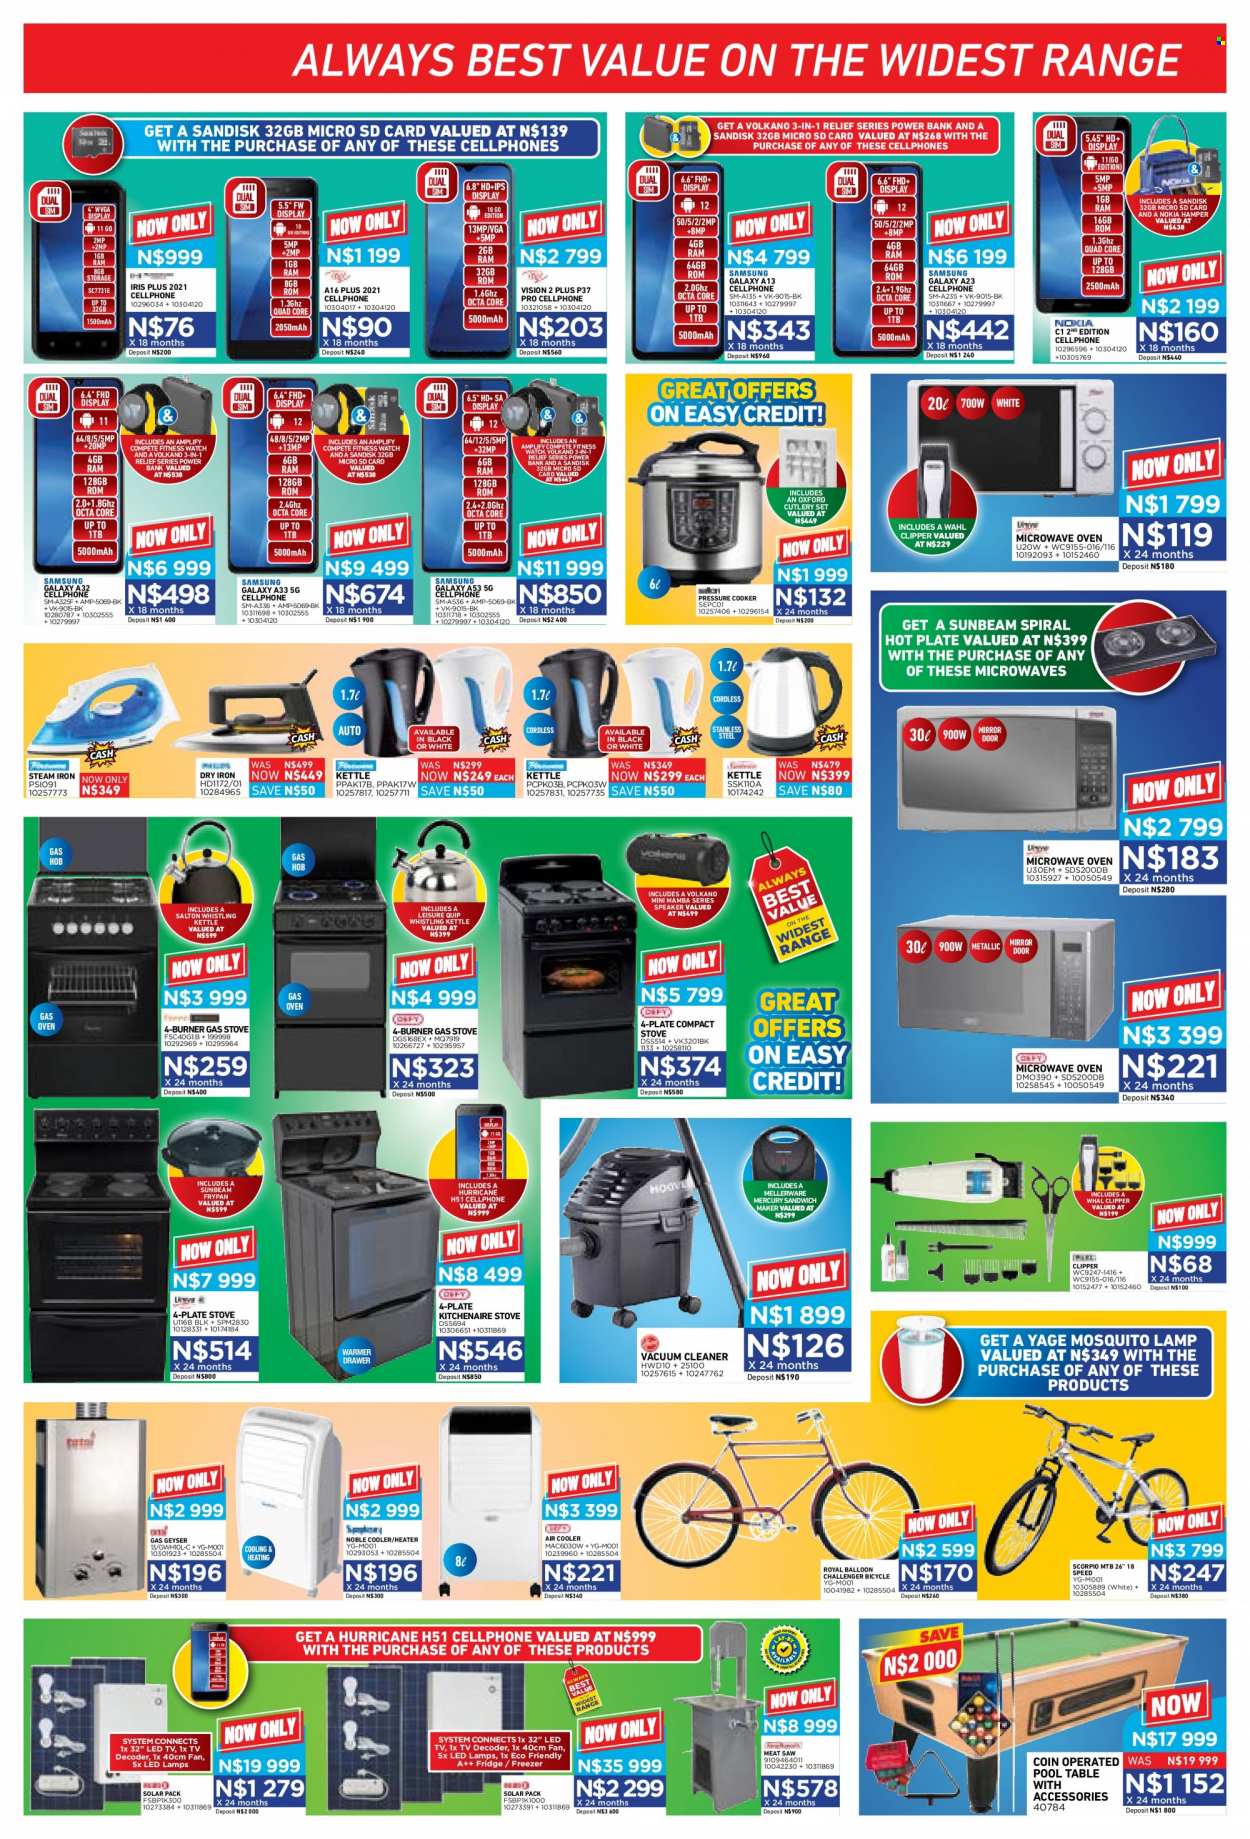 Furnmart catalogue  - 19/09/2022 - 15/10/2022 - Sales products - table, mirror, fitness smart watch, memory card, Sandisk, power bank, LED TV, TV, decoder, speaker, Volkano, freezer, refrigerator, fridge, oven, gas stove, microwave, hob, Sunbeam, vacuum cleaner, pressure cooker, sandwich maker, kettle, iron, steam iron. Page 7.